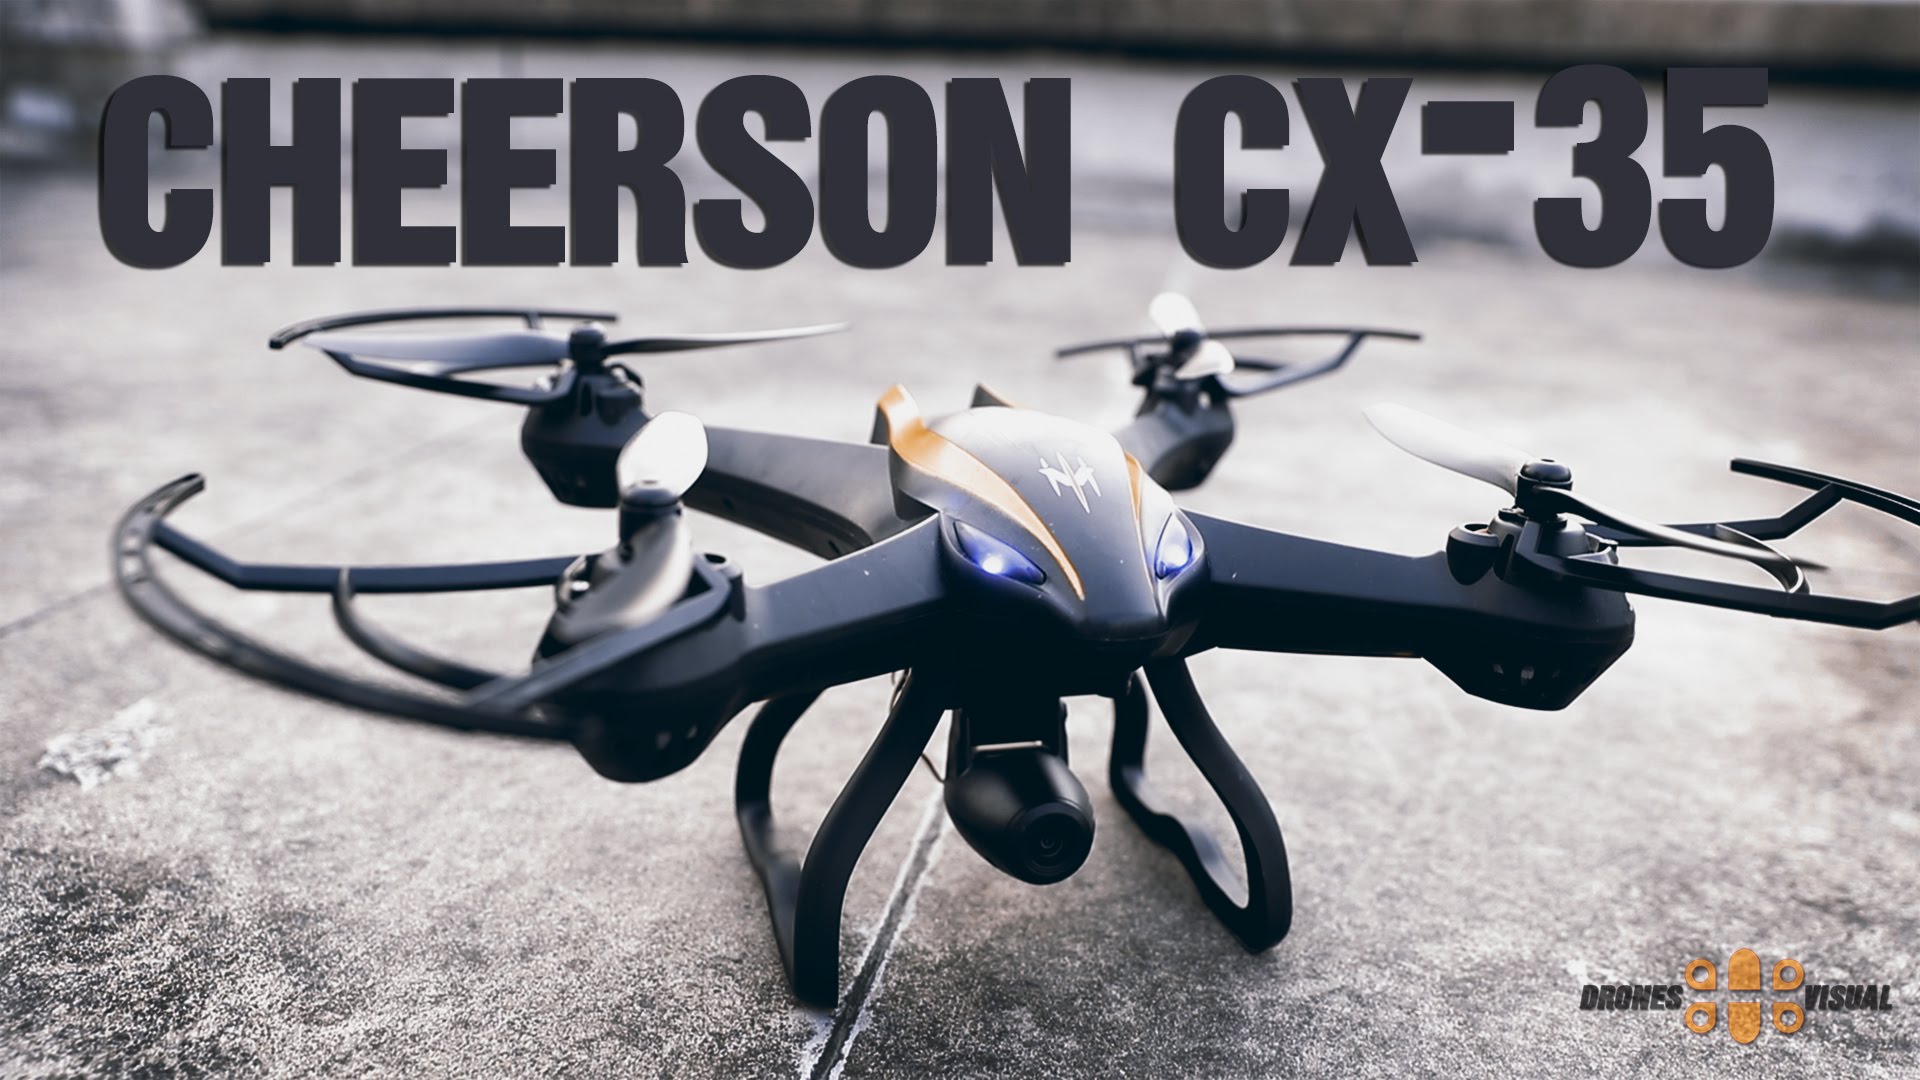 Cheerson CX 35 FPV Quadcopter With Altitude Hold